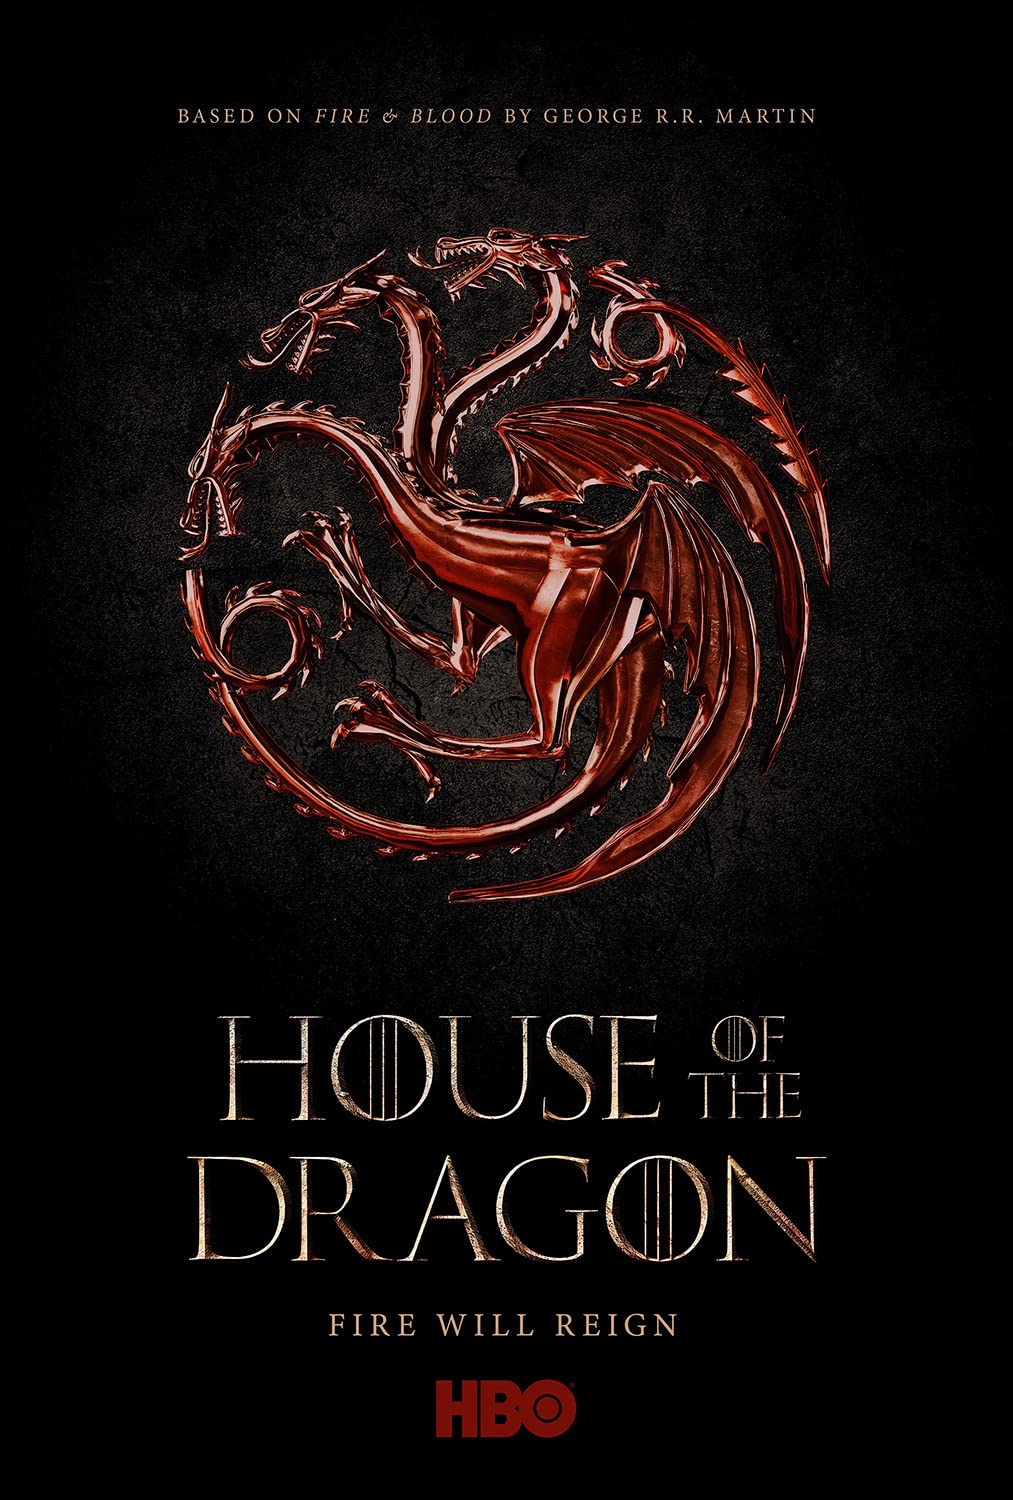 Game of throngs requel - All You Should Know About House of the Dragon Series - Trailer, Plot, Cast, Release Date & More